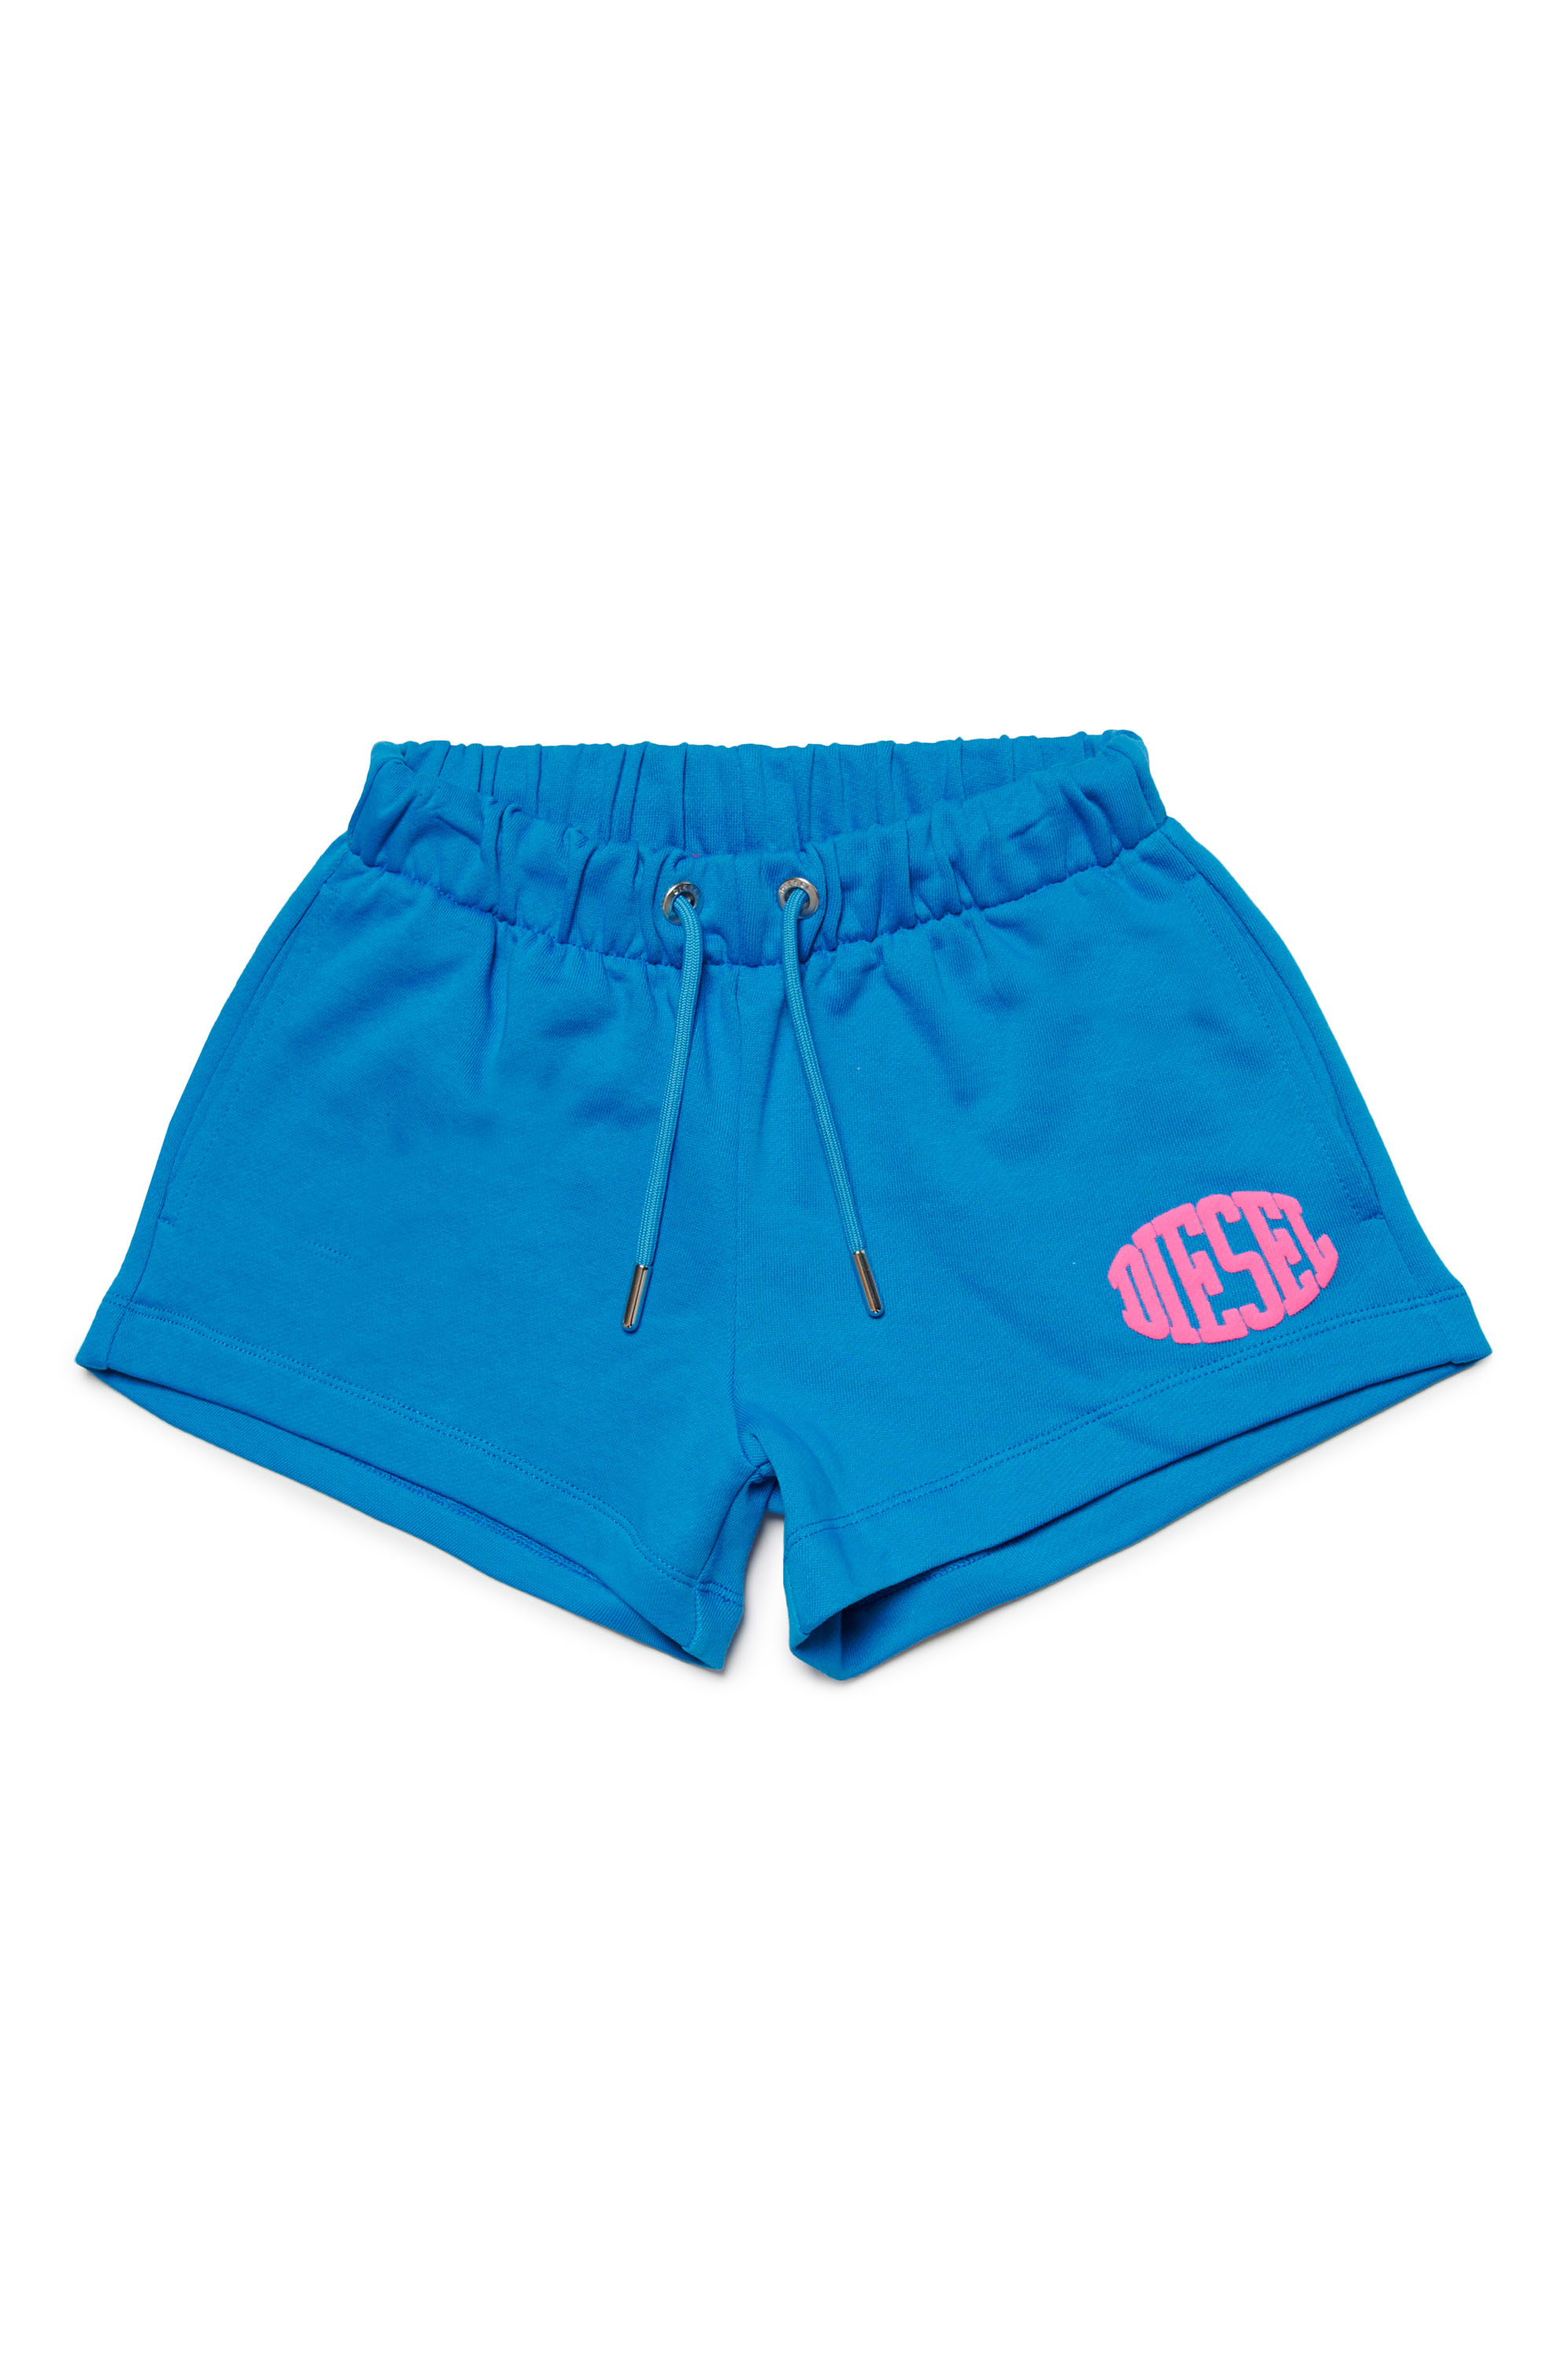 Sweat shorts with puffy Oval D logo